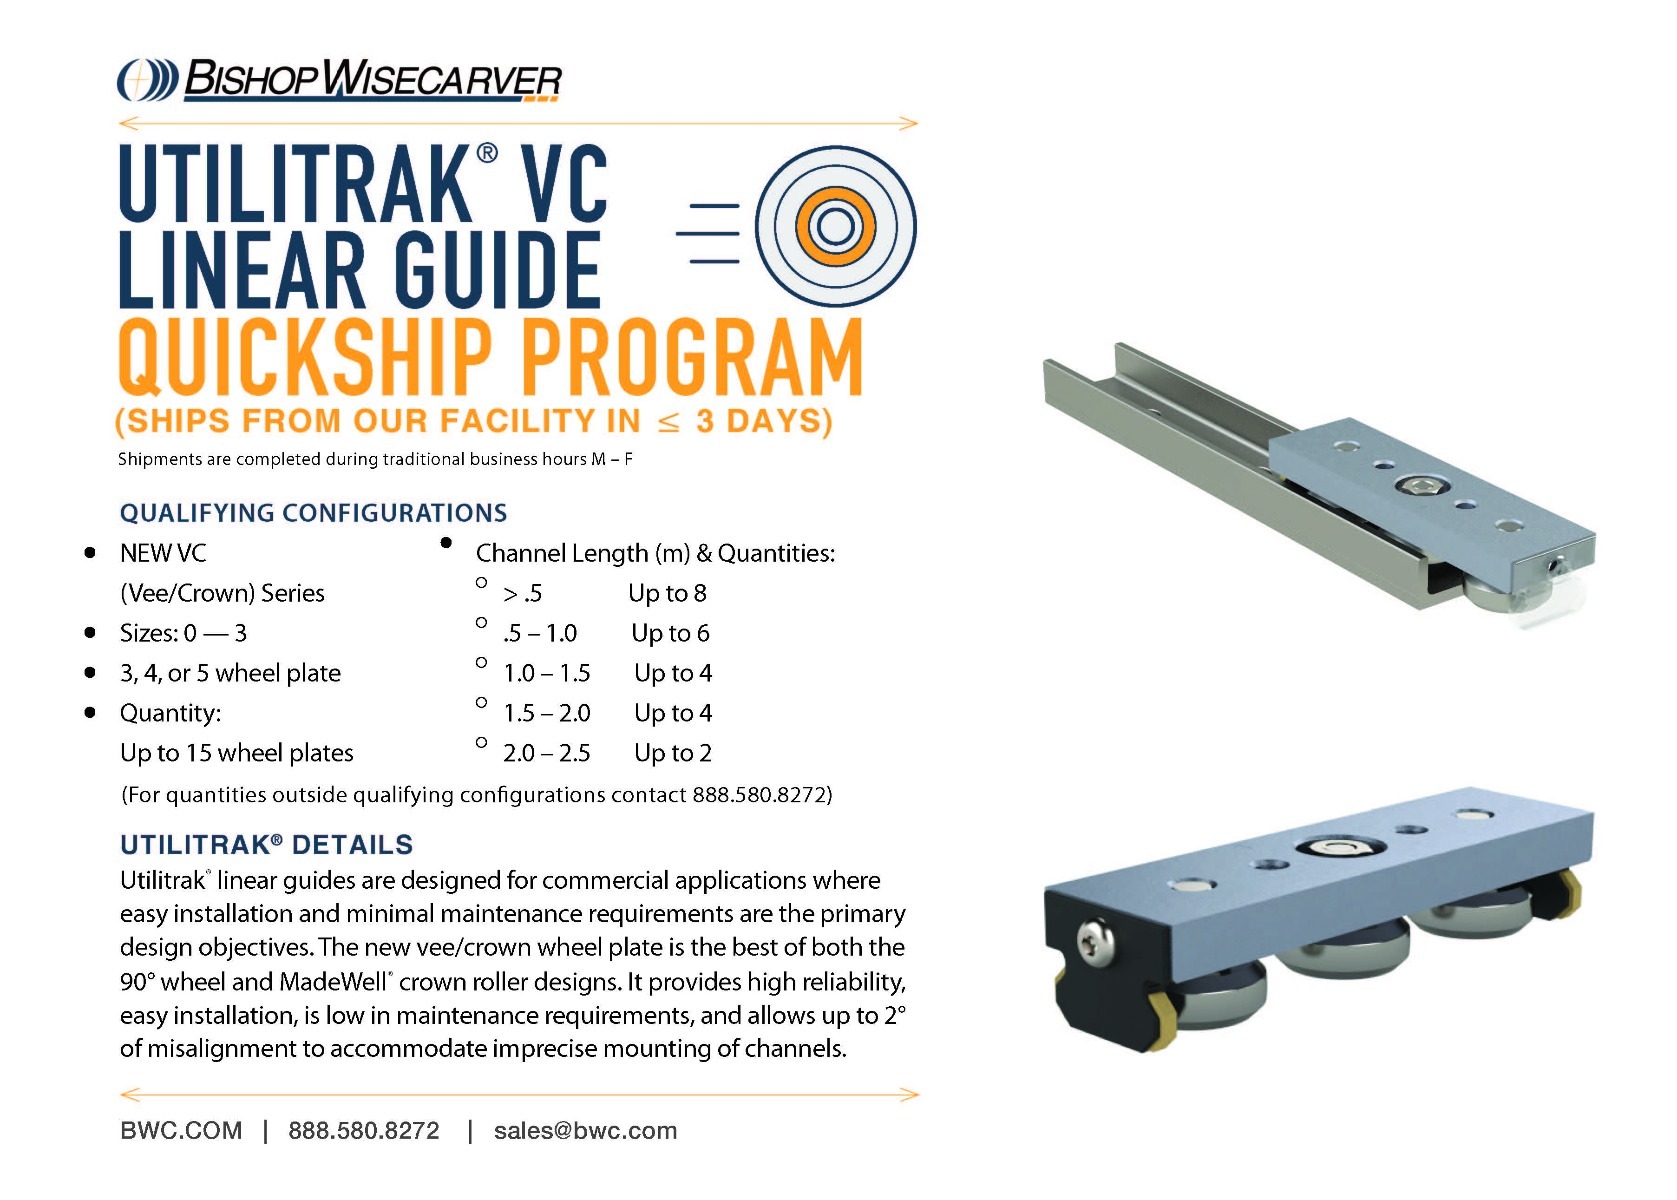 UTVC QuickShip Program promotion showing options that are available to ship within a few days.